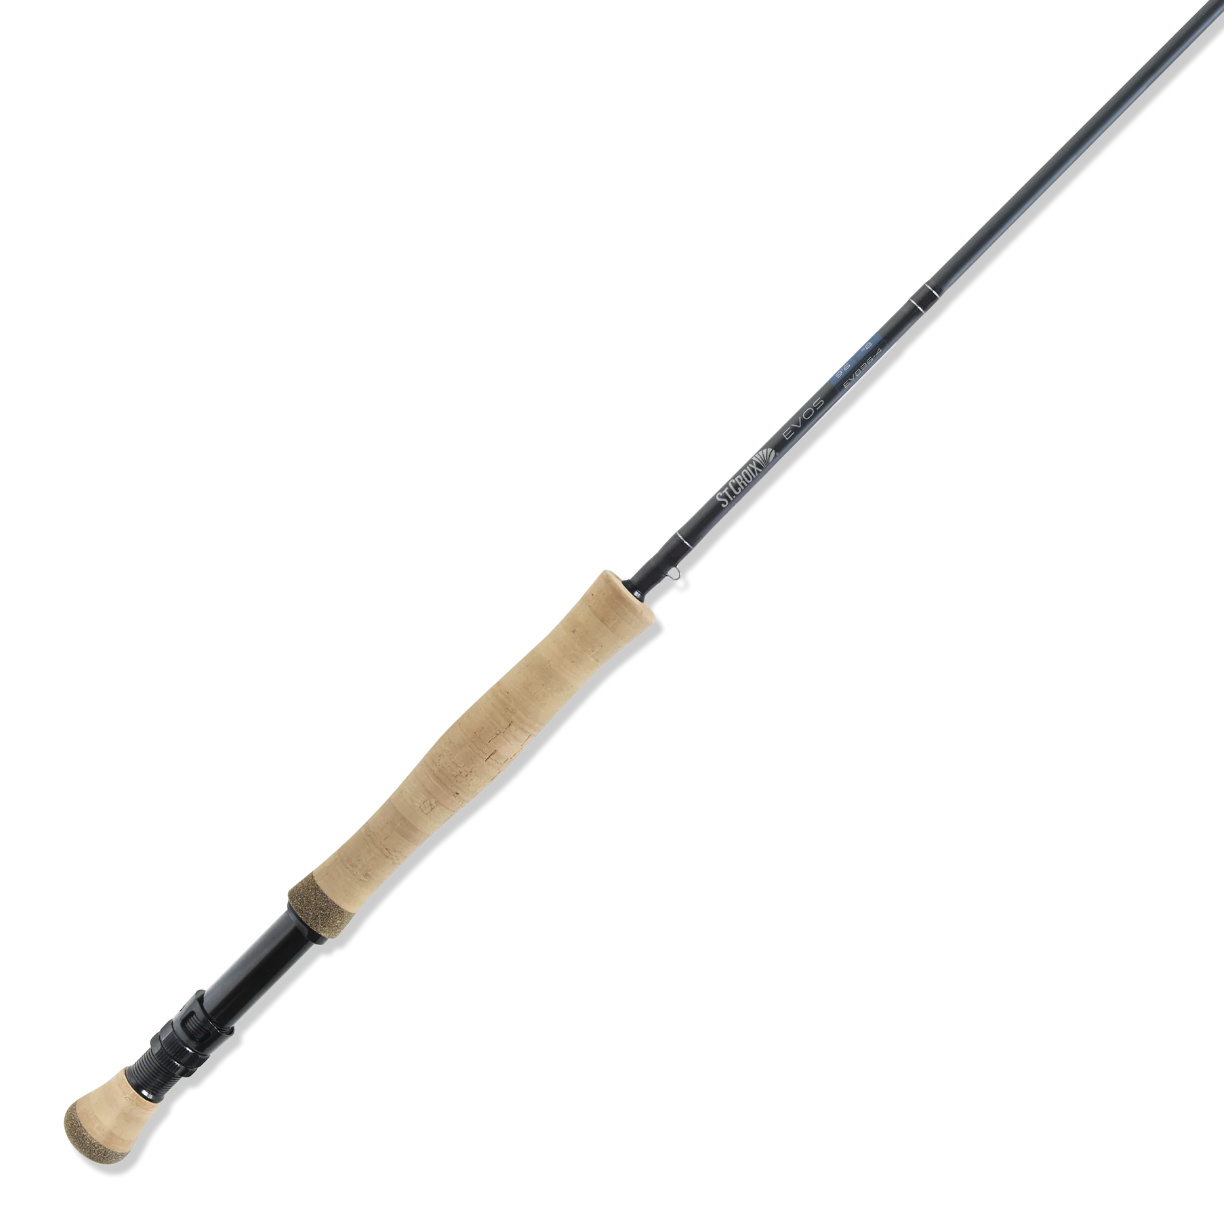 St. Croix Evos Fly Rod, engineered with advanced SCVI graphite for superior strength and sensitivity